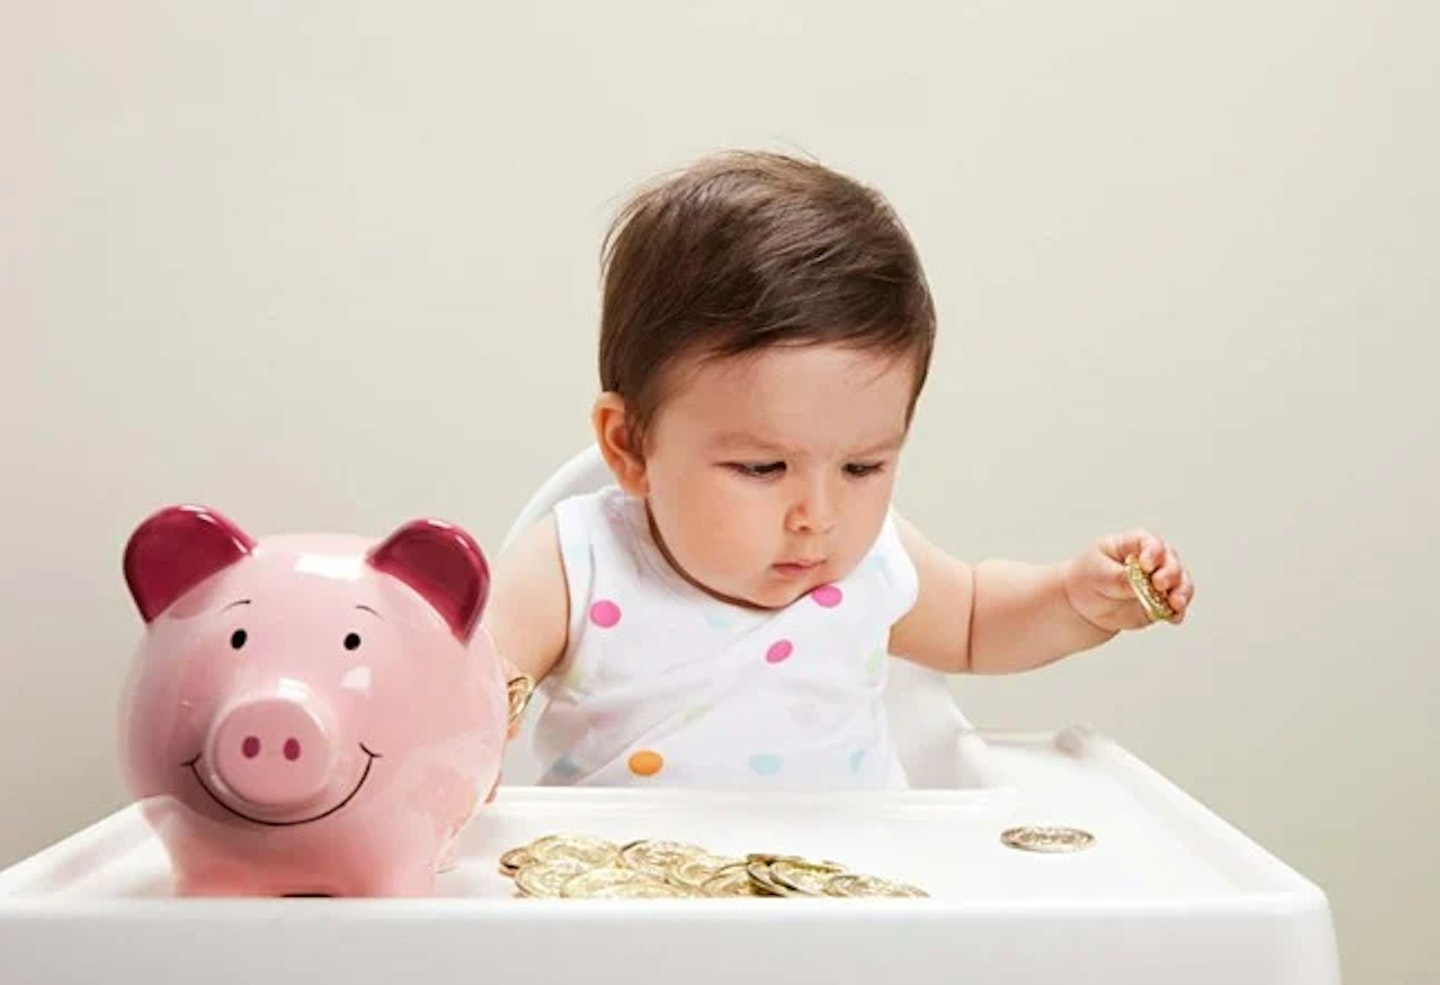 You’ll save on childcare costs